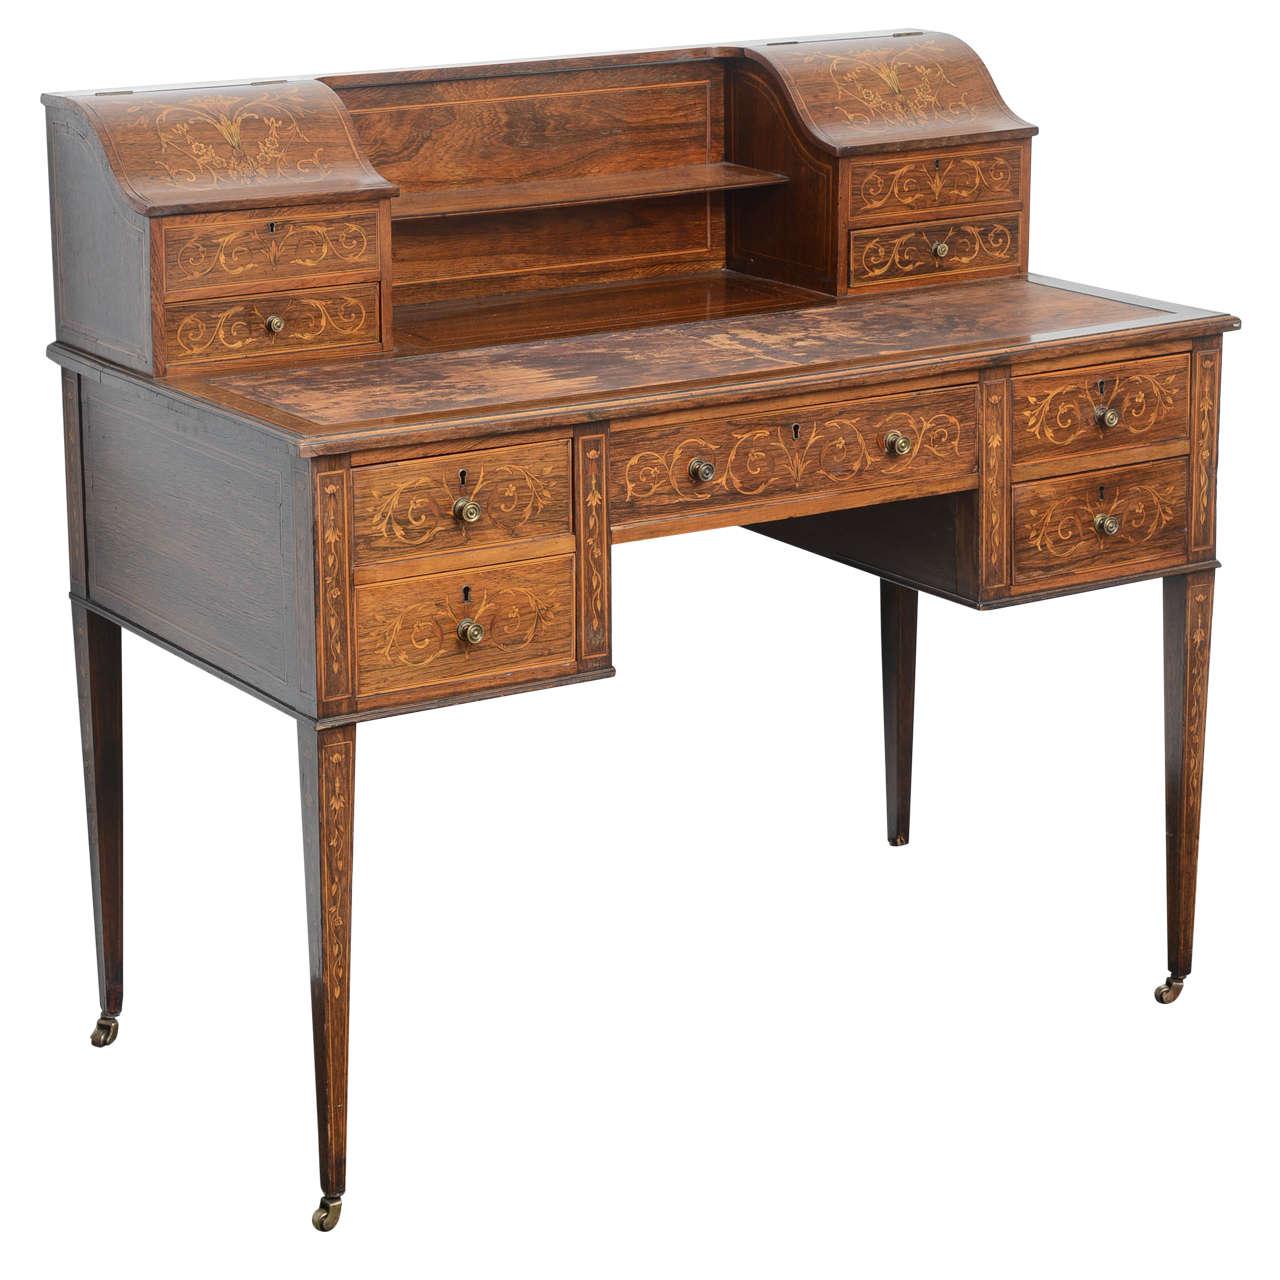 English Antique Rosewood Lady's Writing Desk with Marquetry Inlay